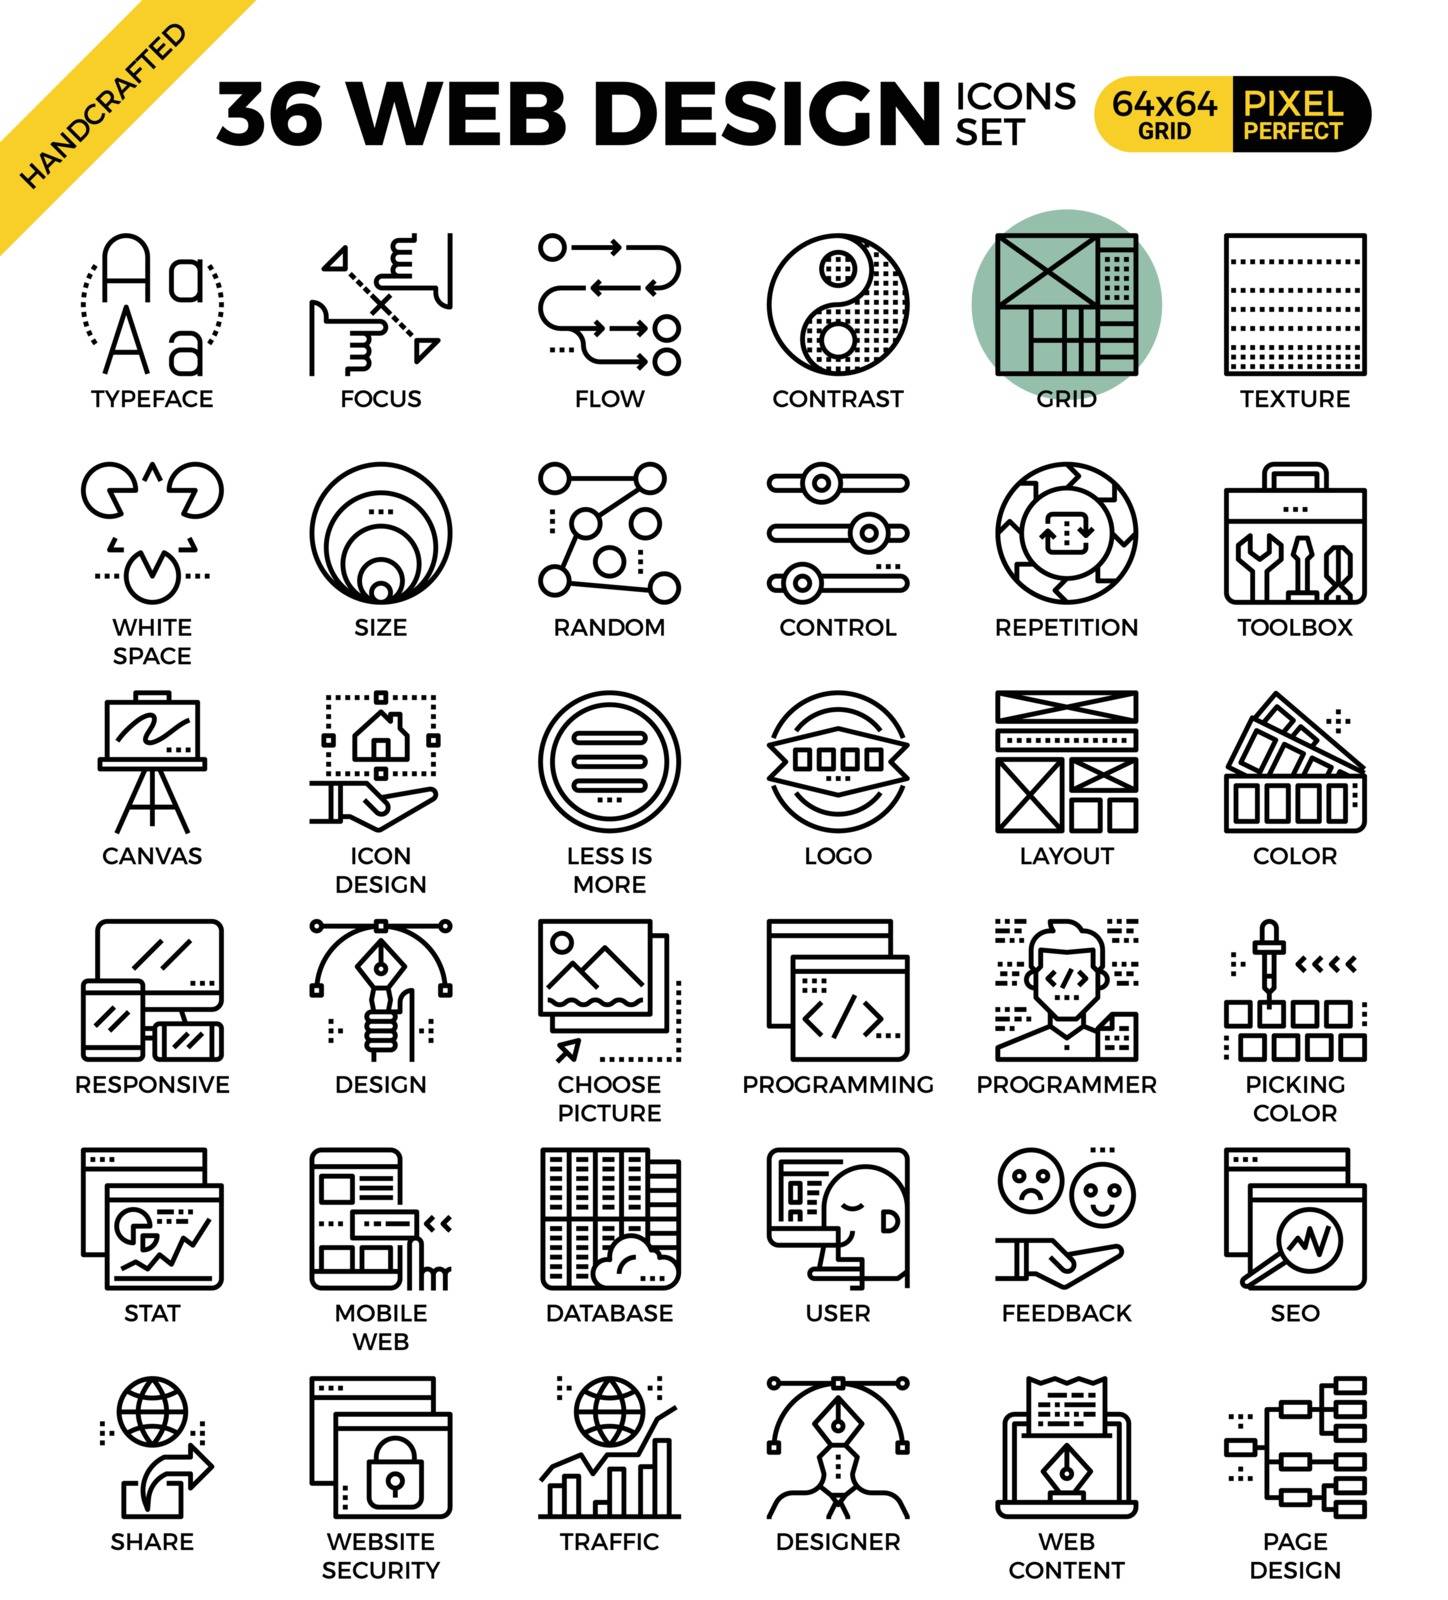 Web design icons by nongpimmy